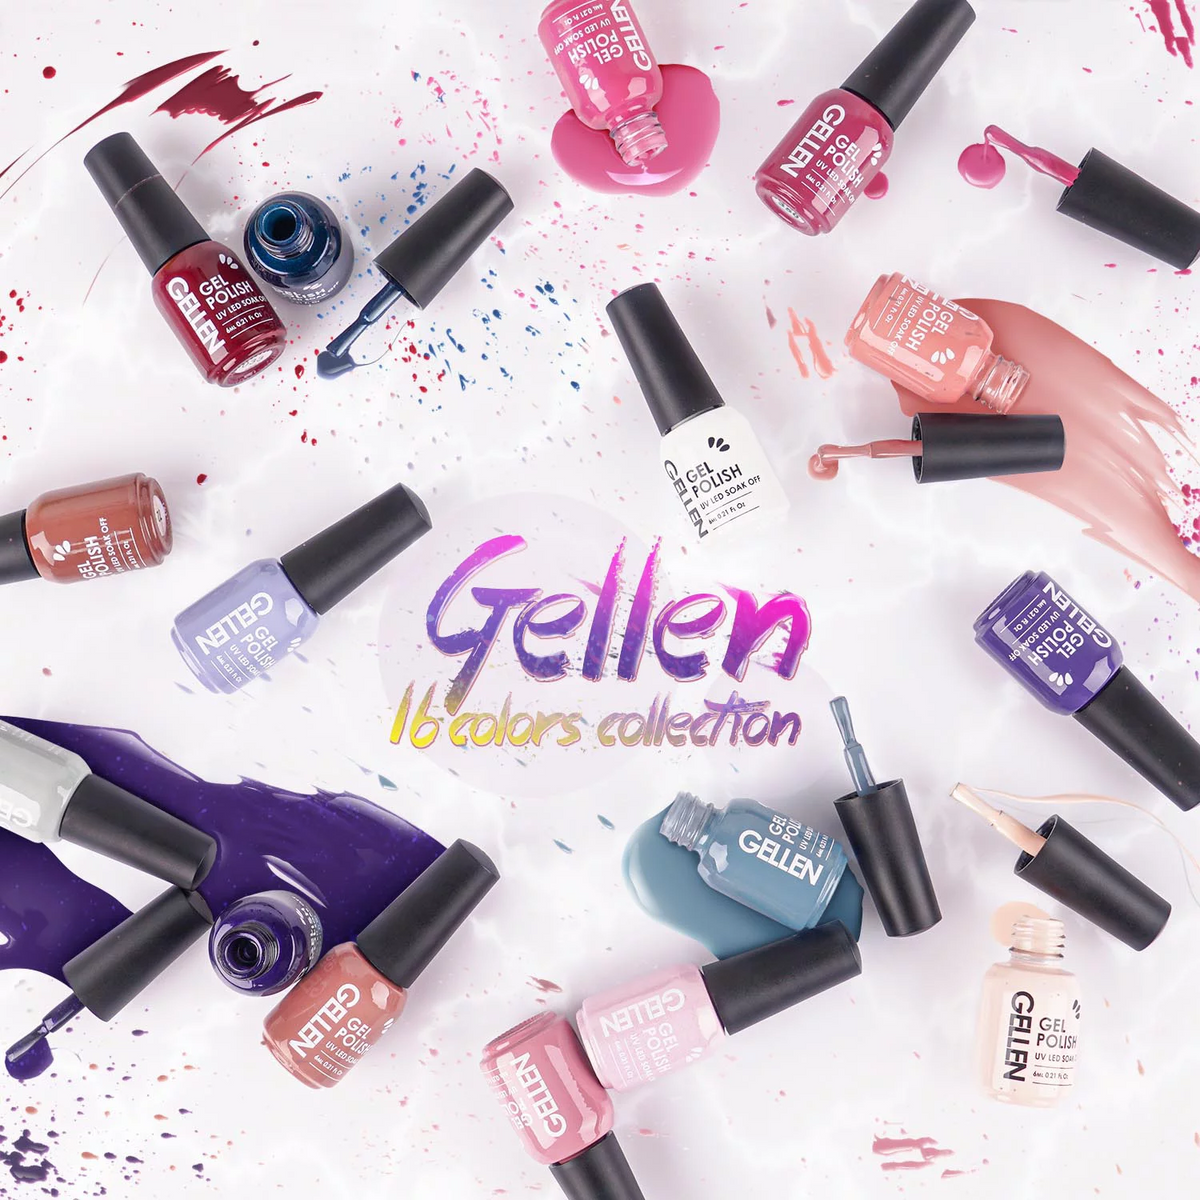 Gellen Gel Nail Polish Kit - 16 Pcs Nude Grays Gel Nail Polish Base and Top Coat Kit, Nail Gel Manicure Kit Mother's Day Gifts for Women